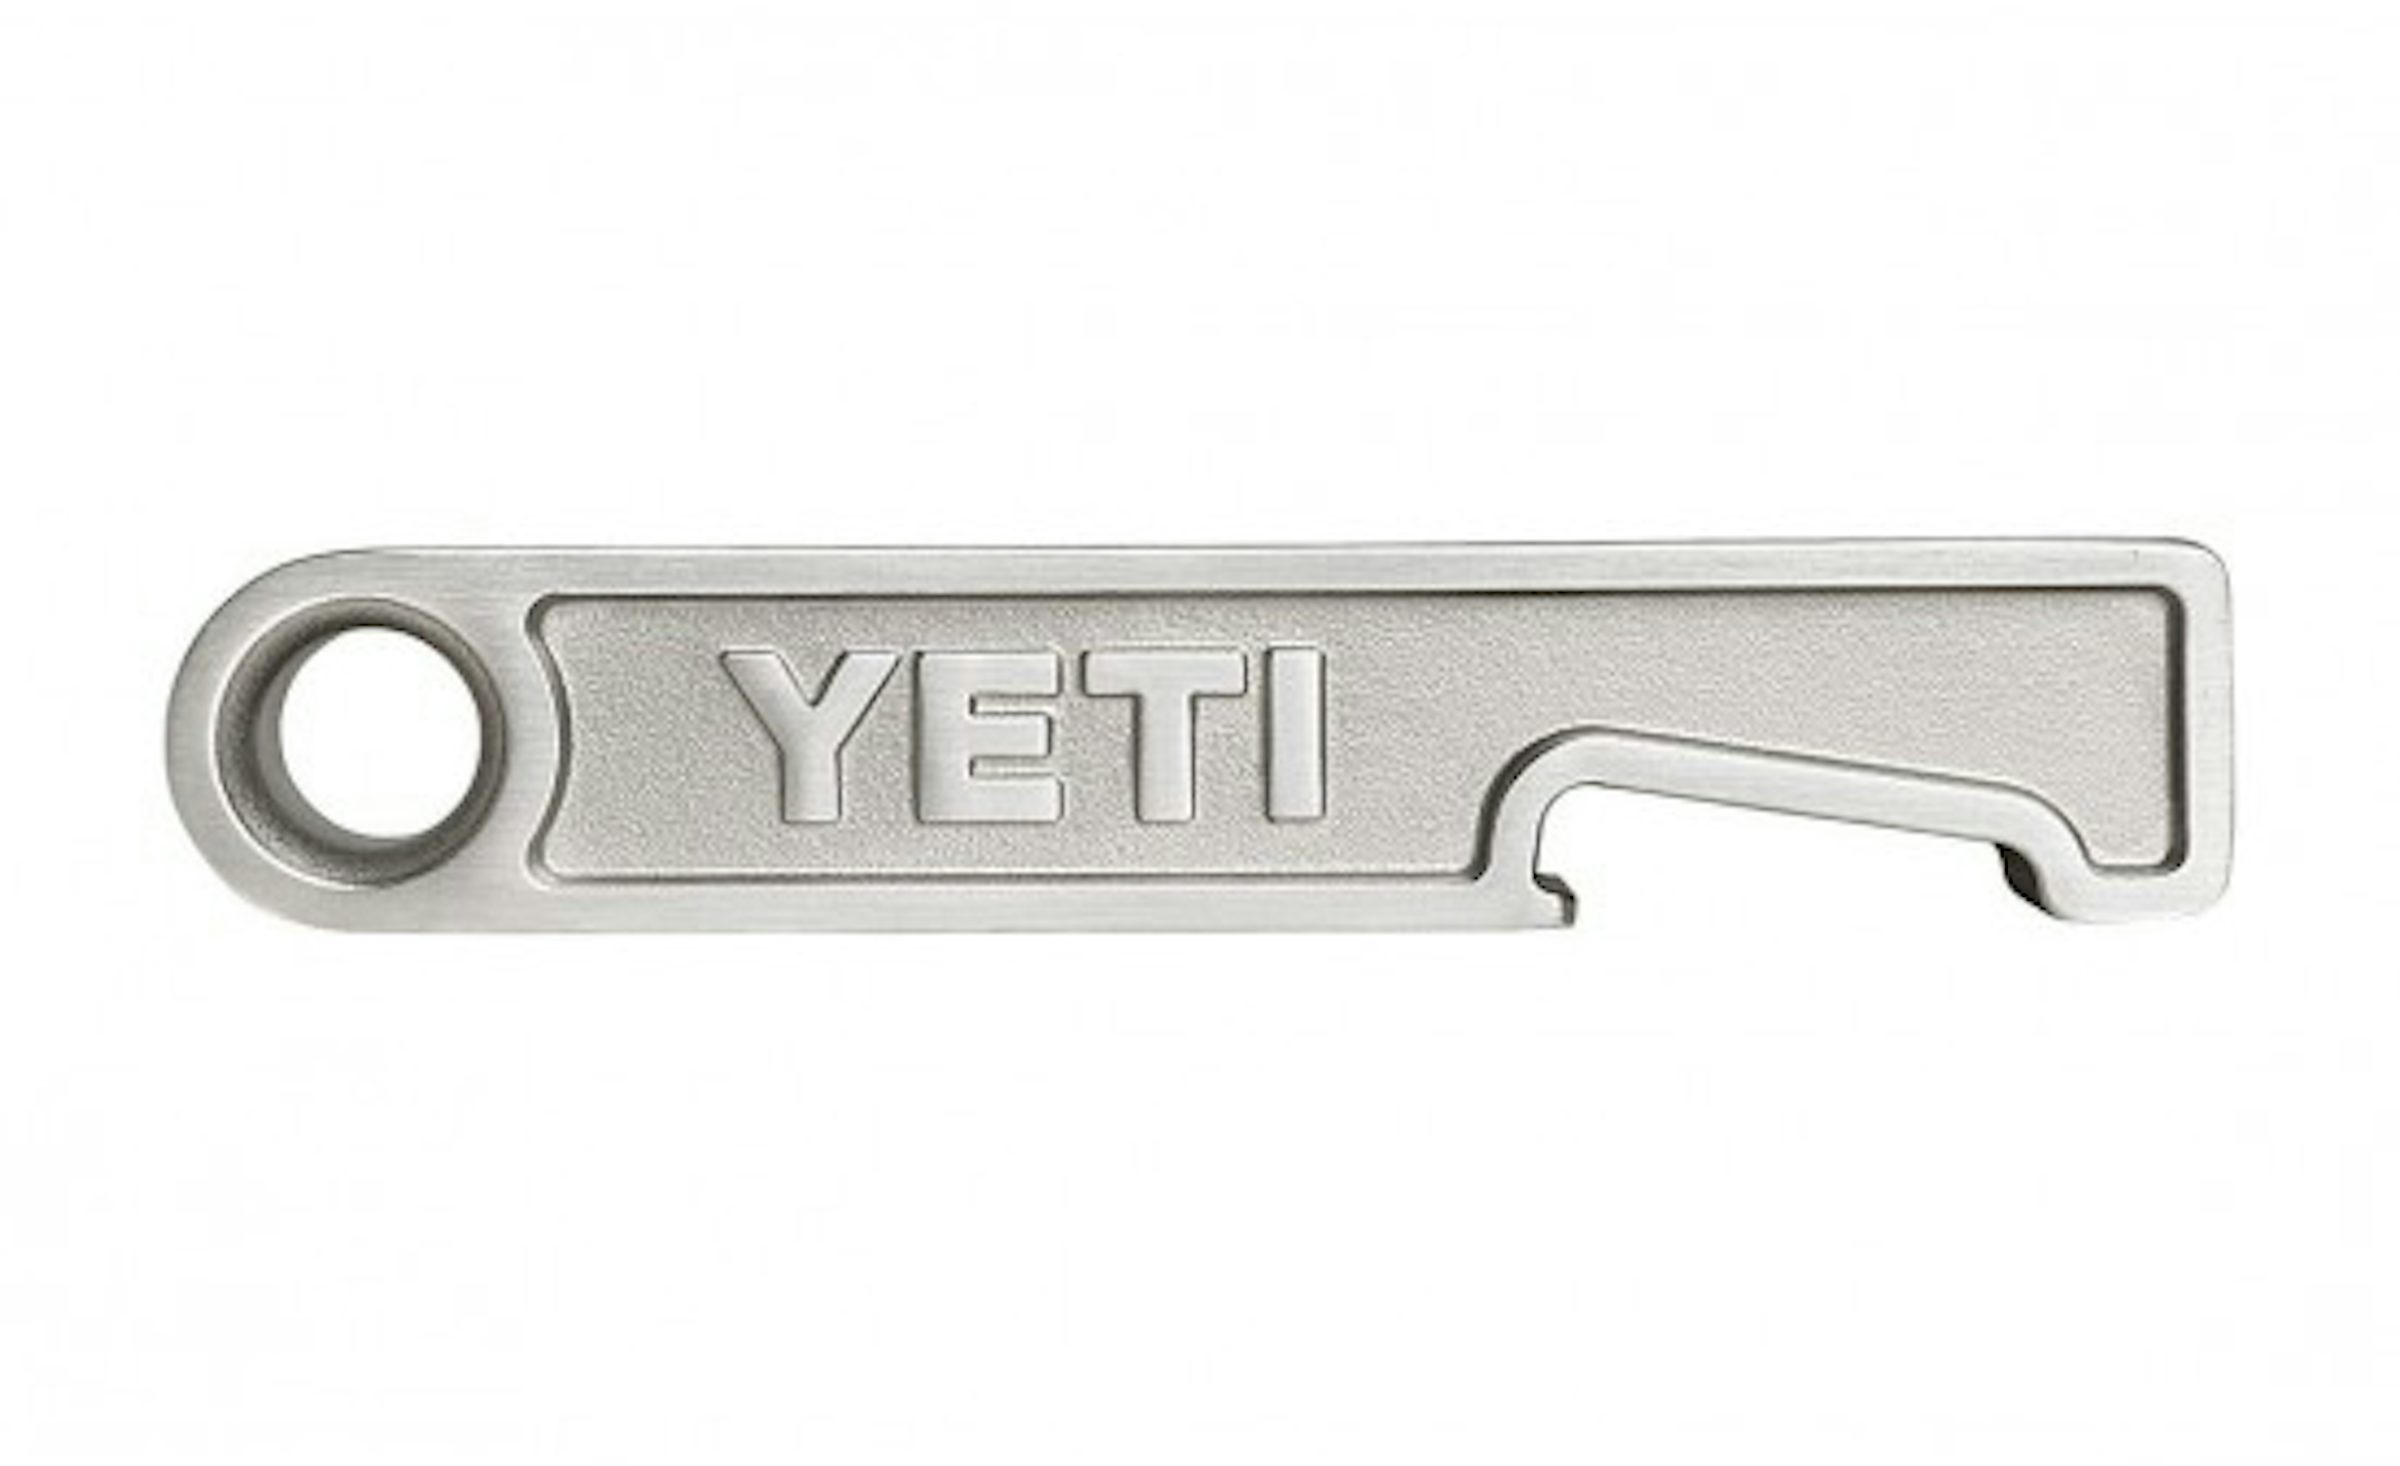 YETI Brick Bottle Opener NEW Limited Edition UNIQUE Rare GIFT Collector  Huge NIB